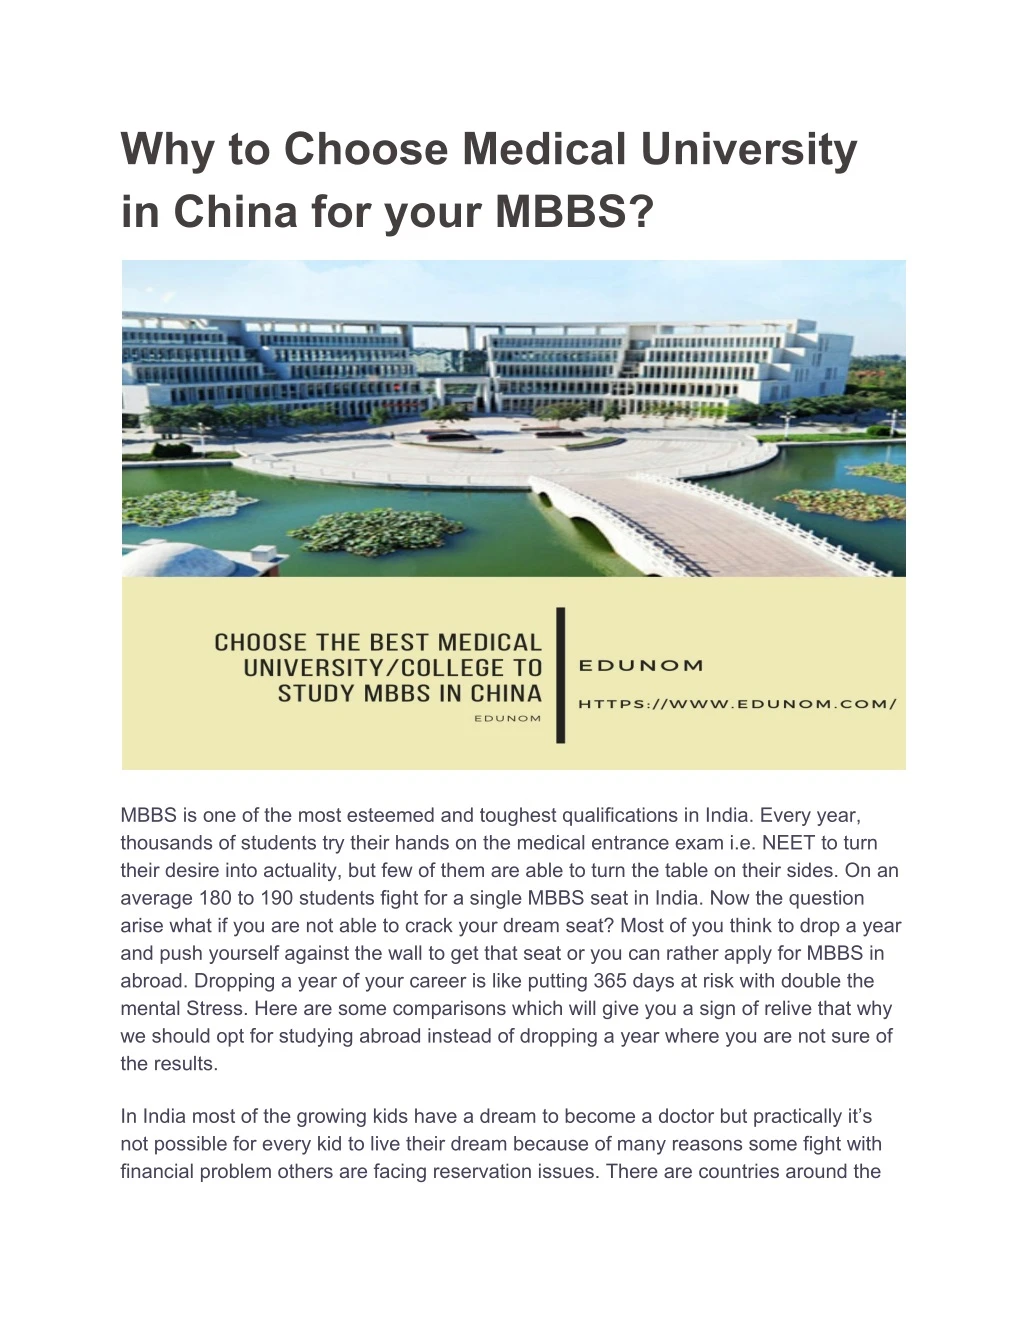 why to choose medical university in china